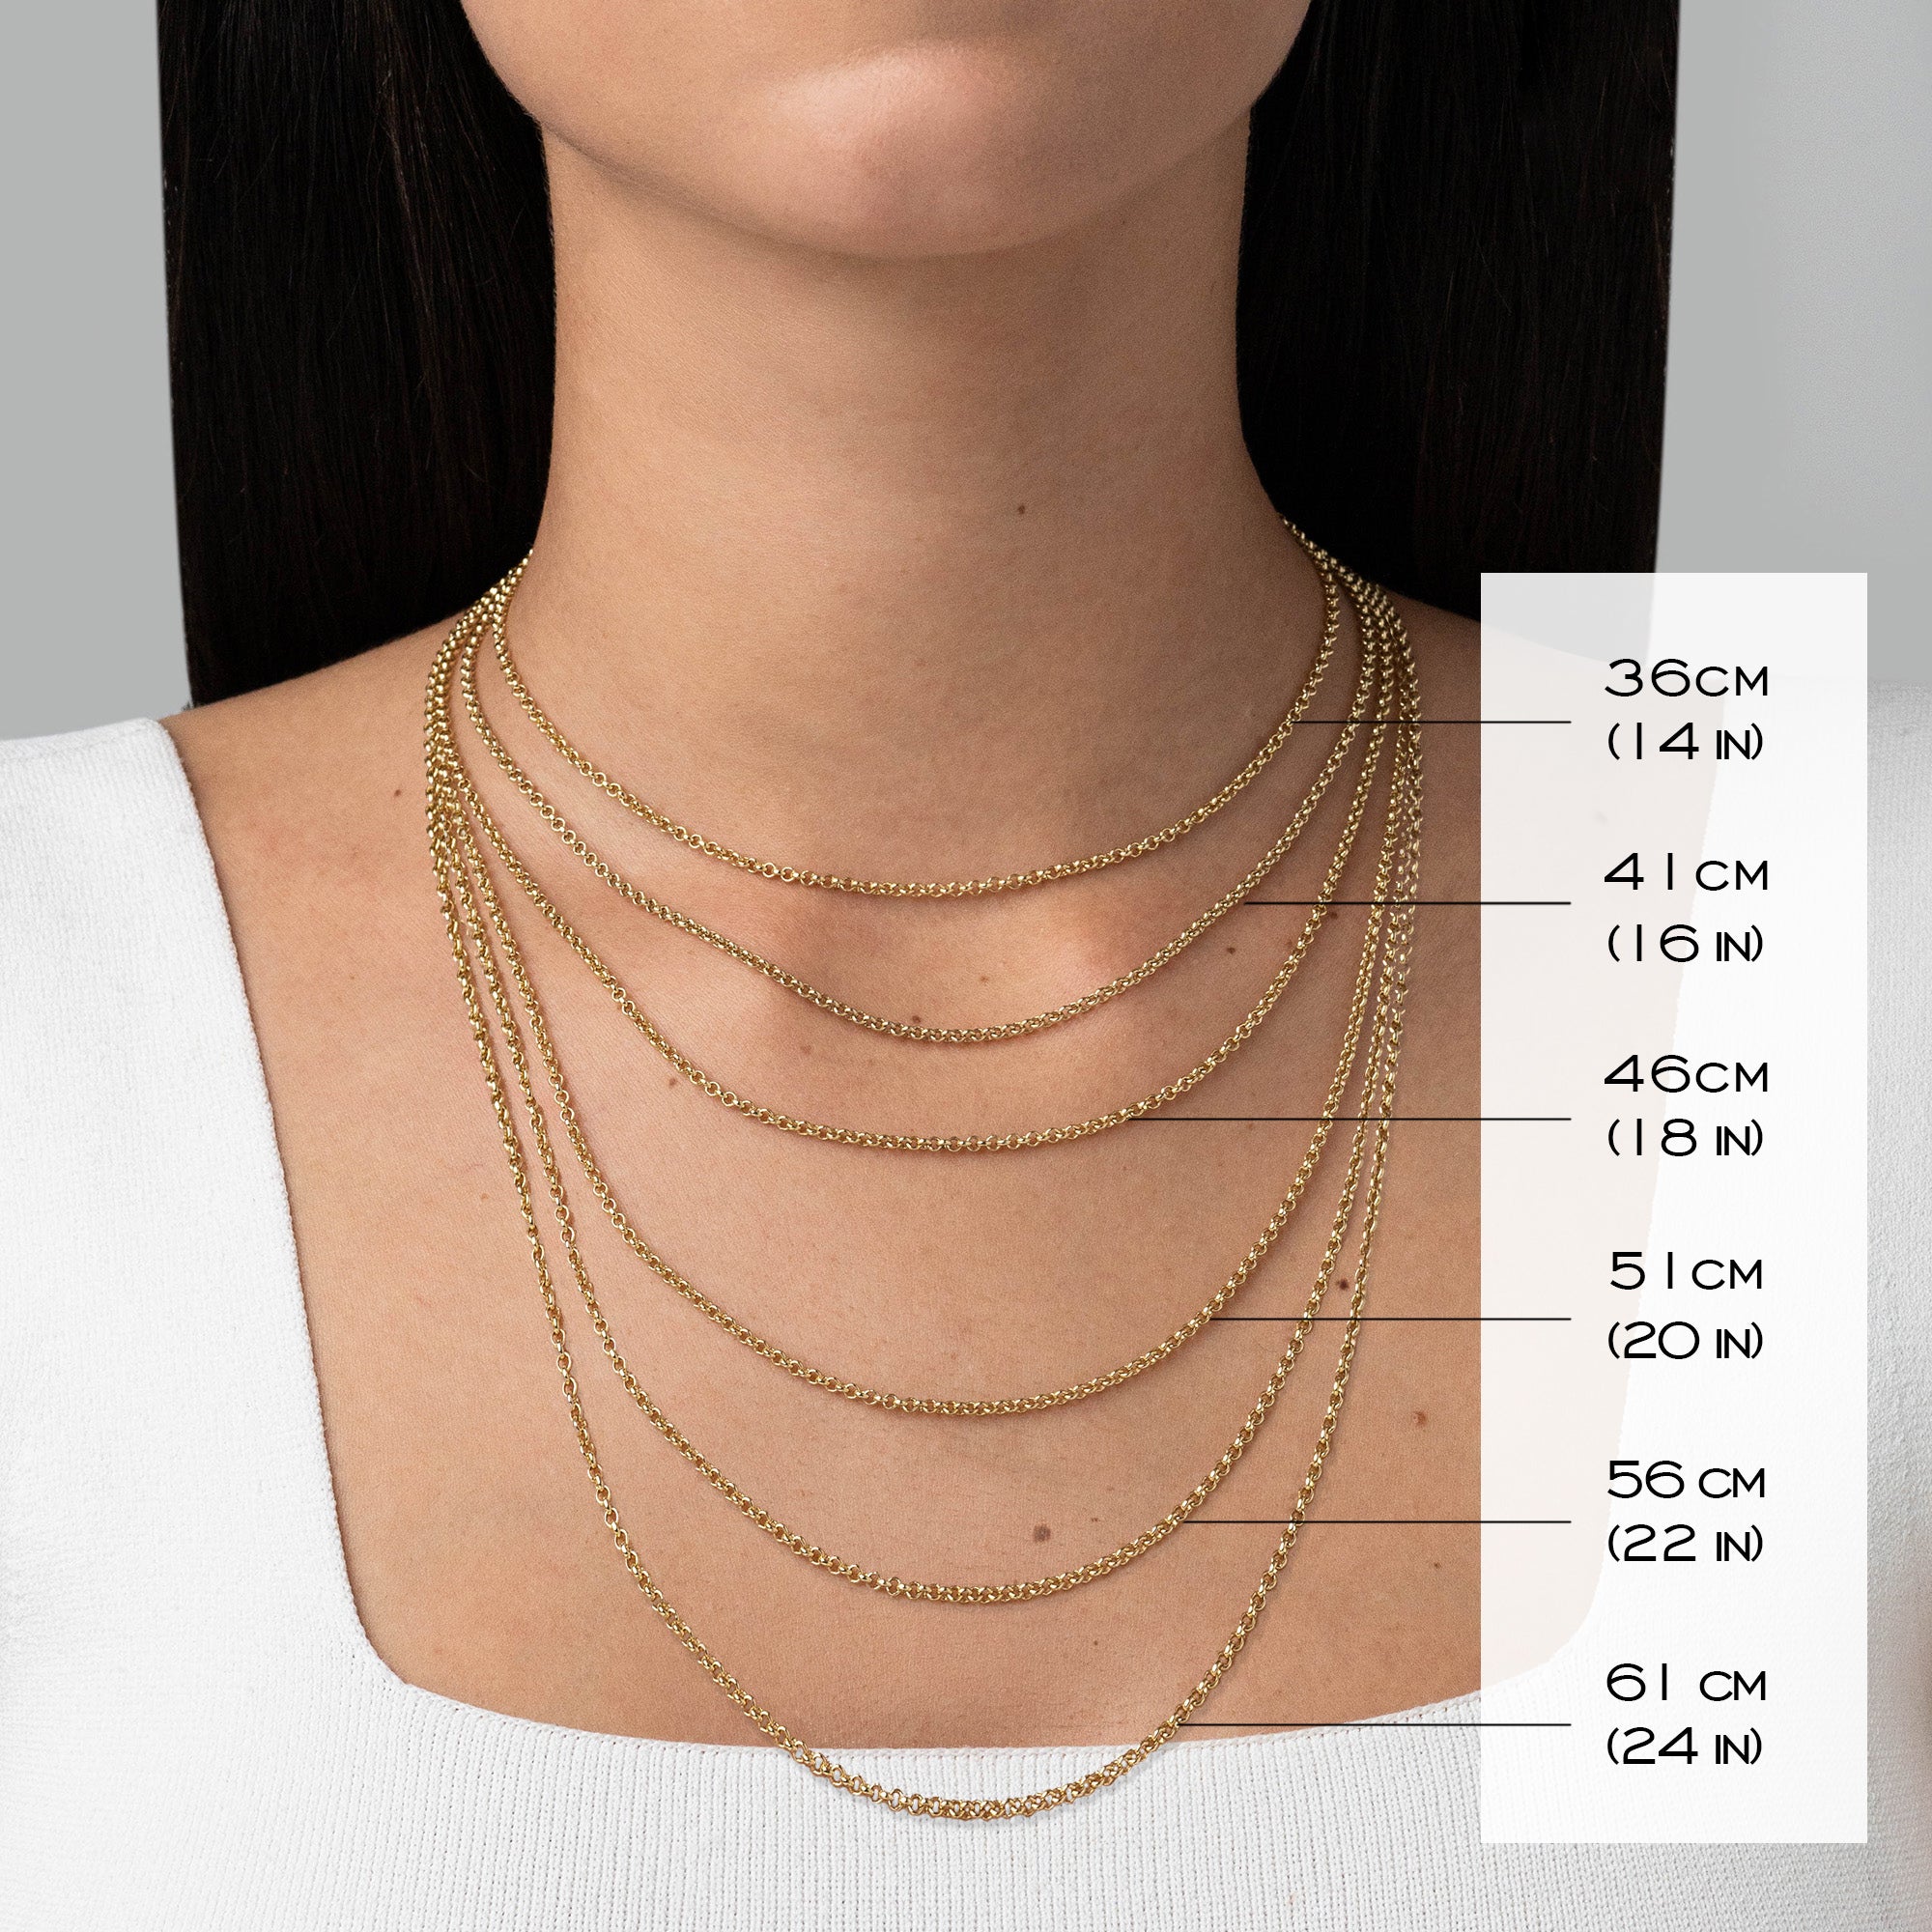 886 Royal Mint Necklaces 886 Square Trace Chain in 18ct Yellow Gold